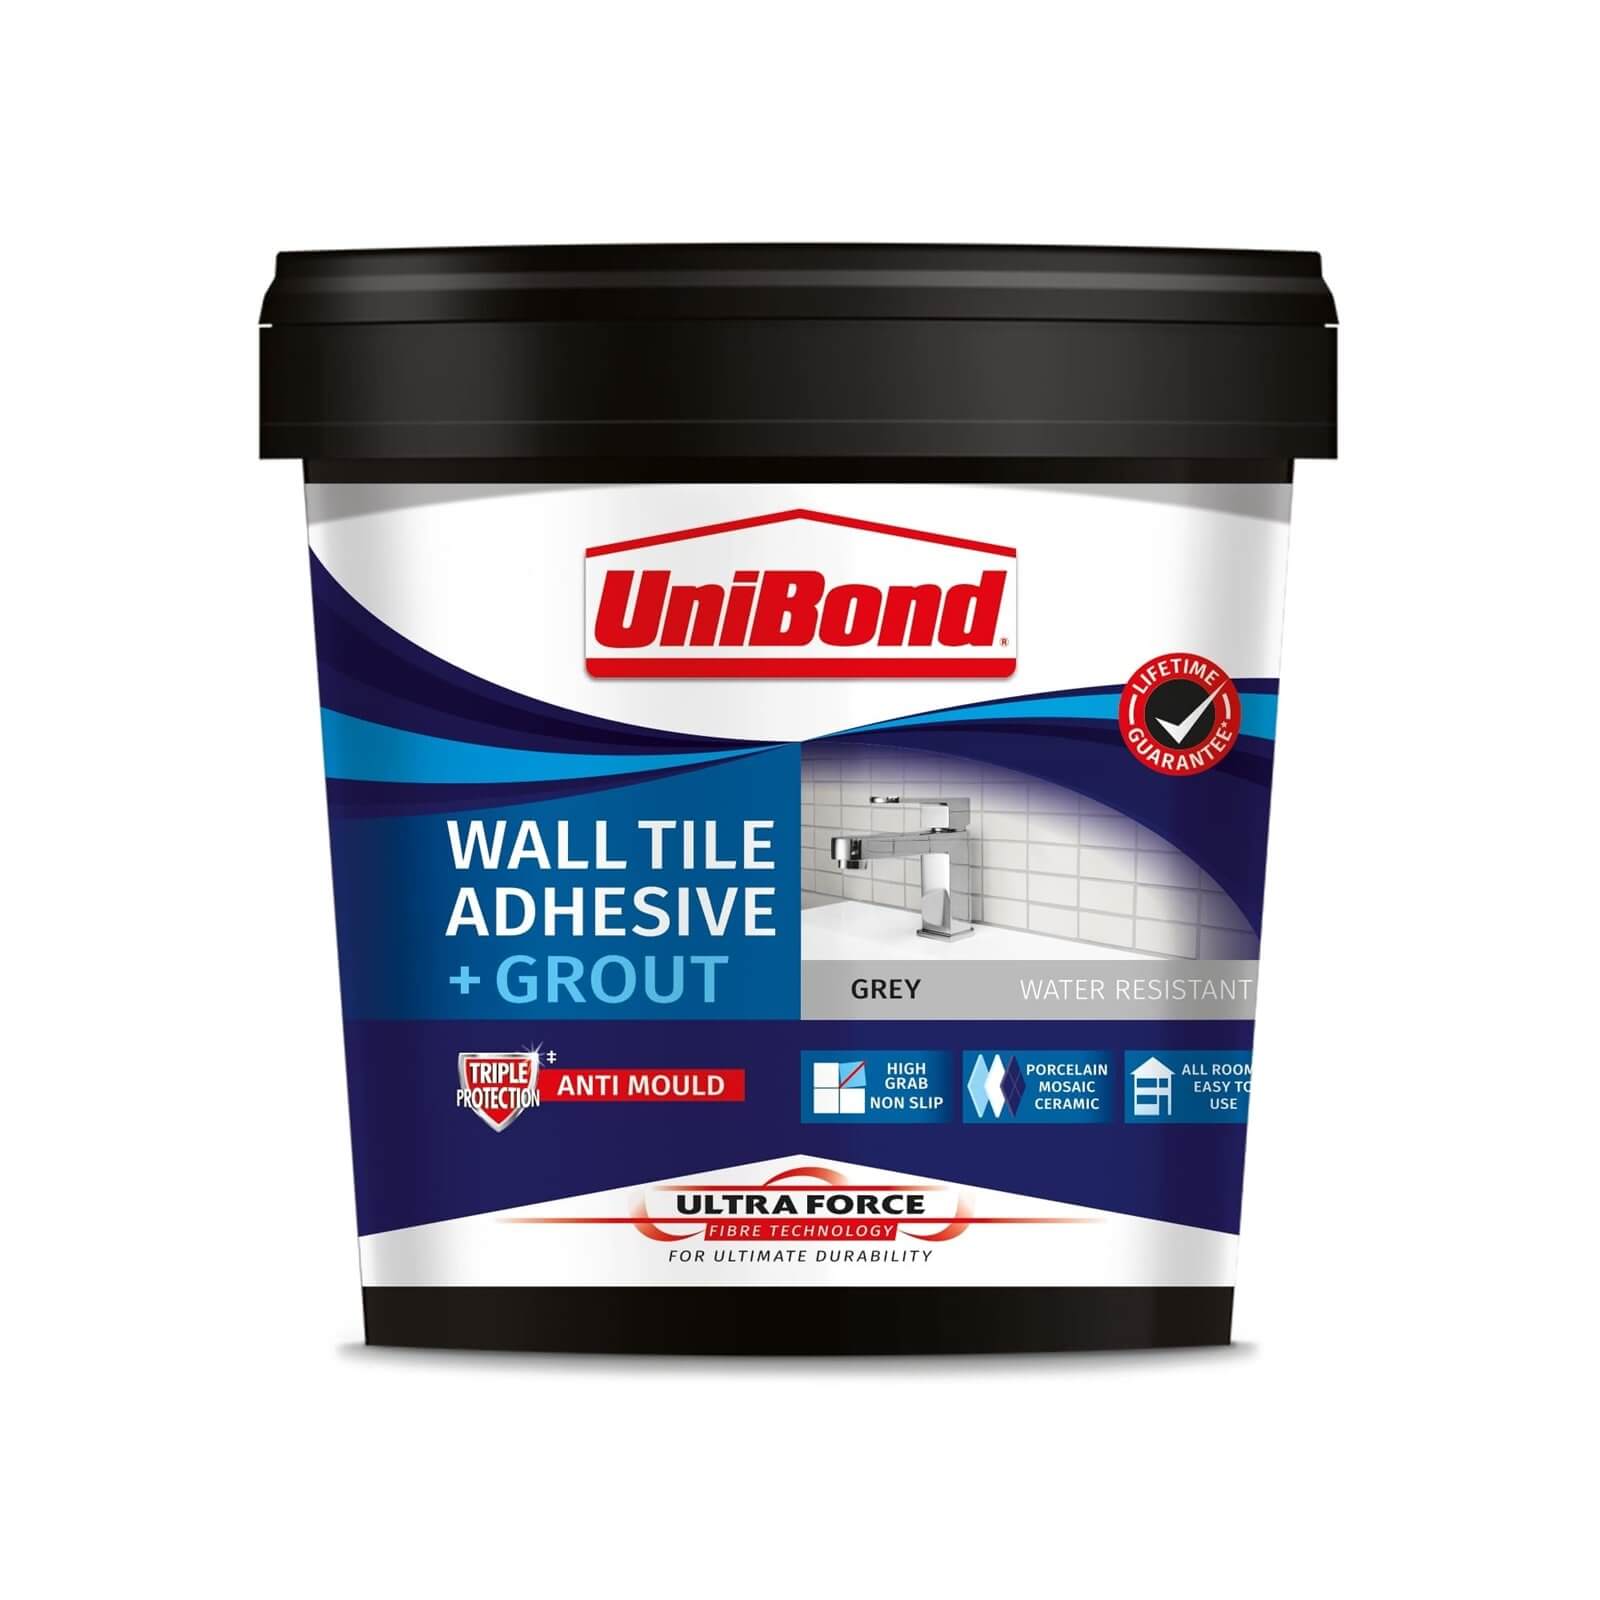 Photo of Unibond Ultraforce Wall Tile Adhesive & Grout Grey 1.38kg